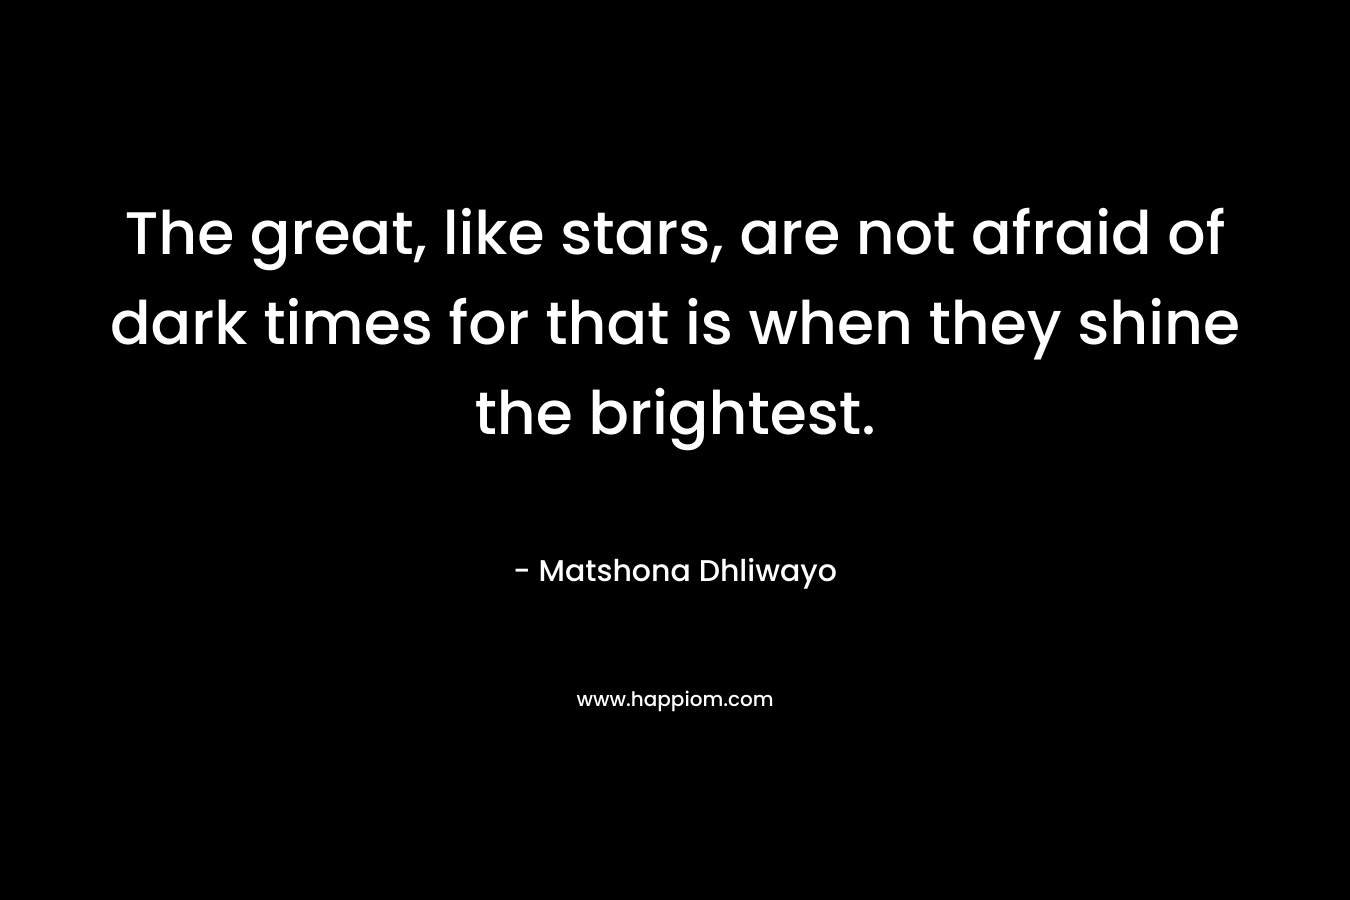 The great, like stars, are not afraid of dark times for that is when they shine the brightest.